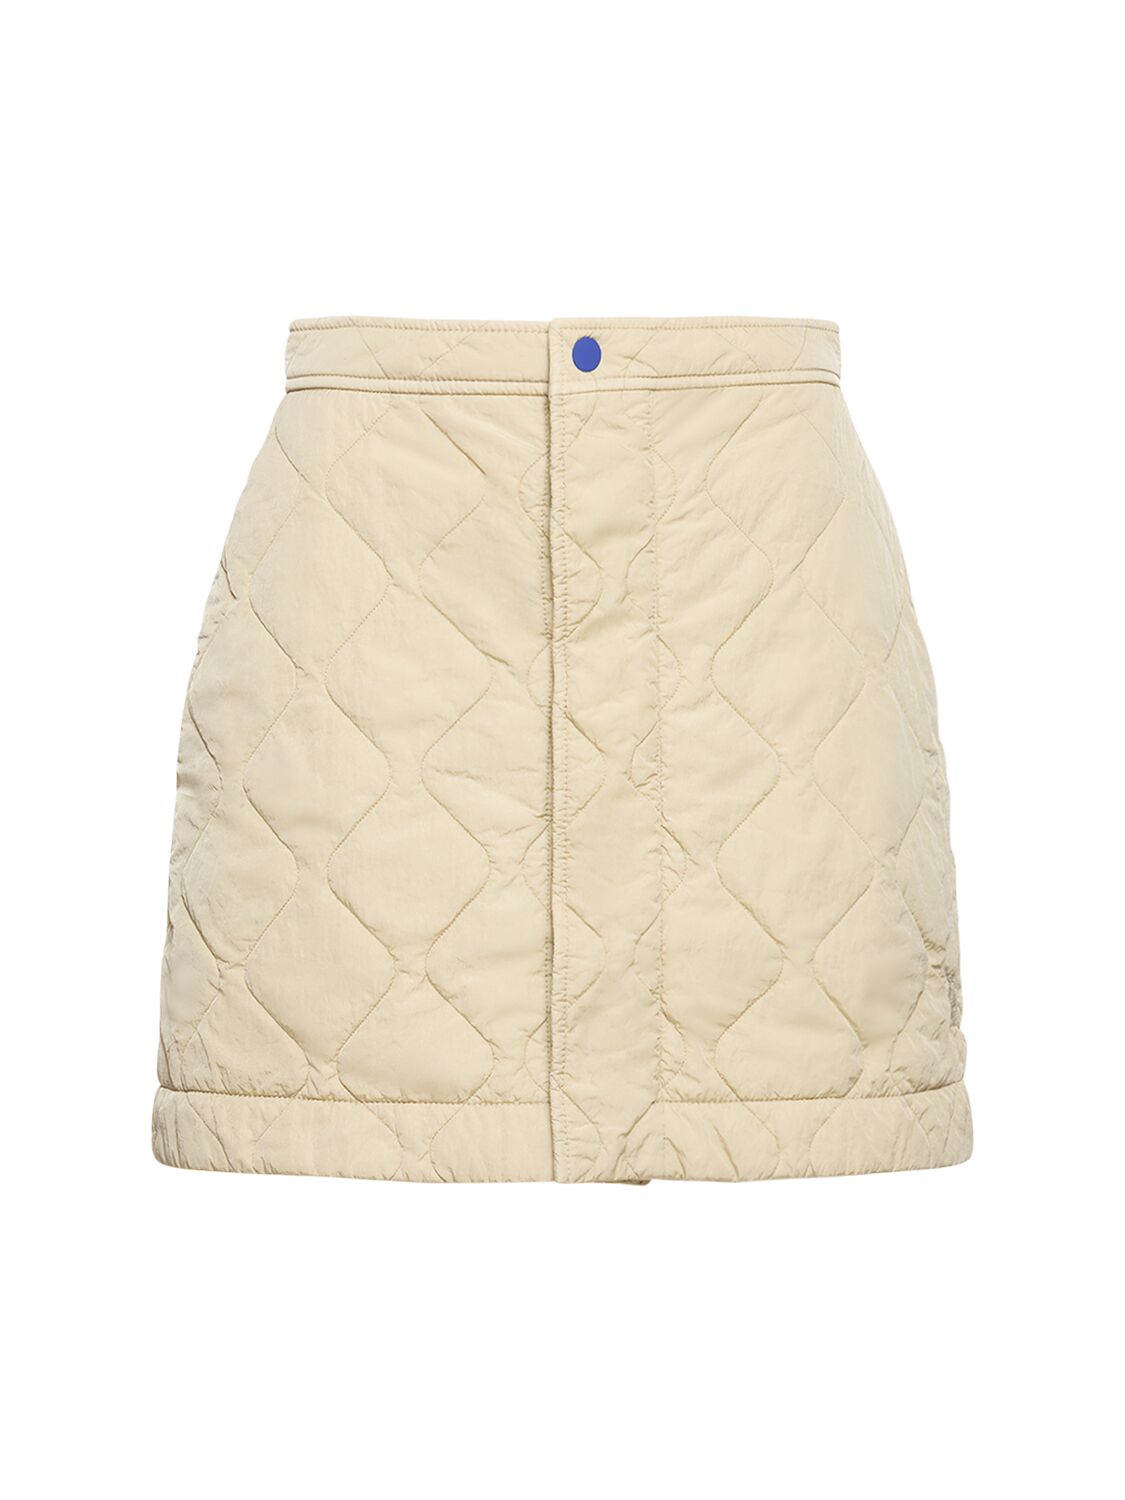 Burberry Reversible Quilted Mini Wrap Skirt In Beige